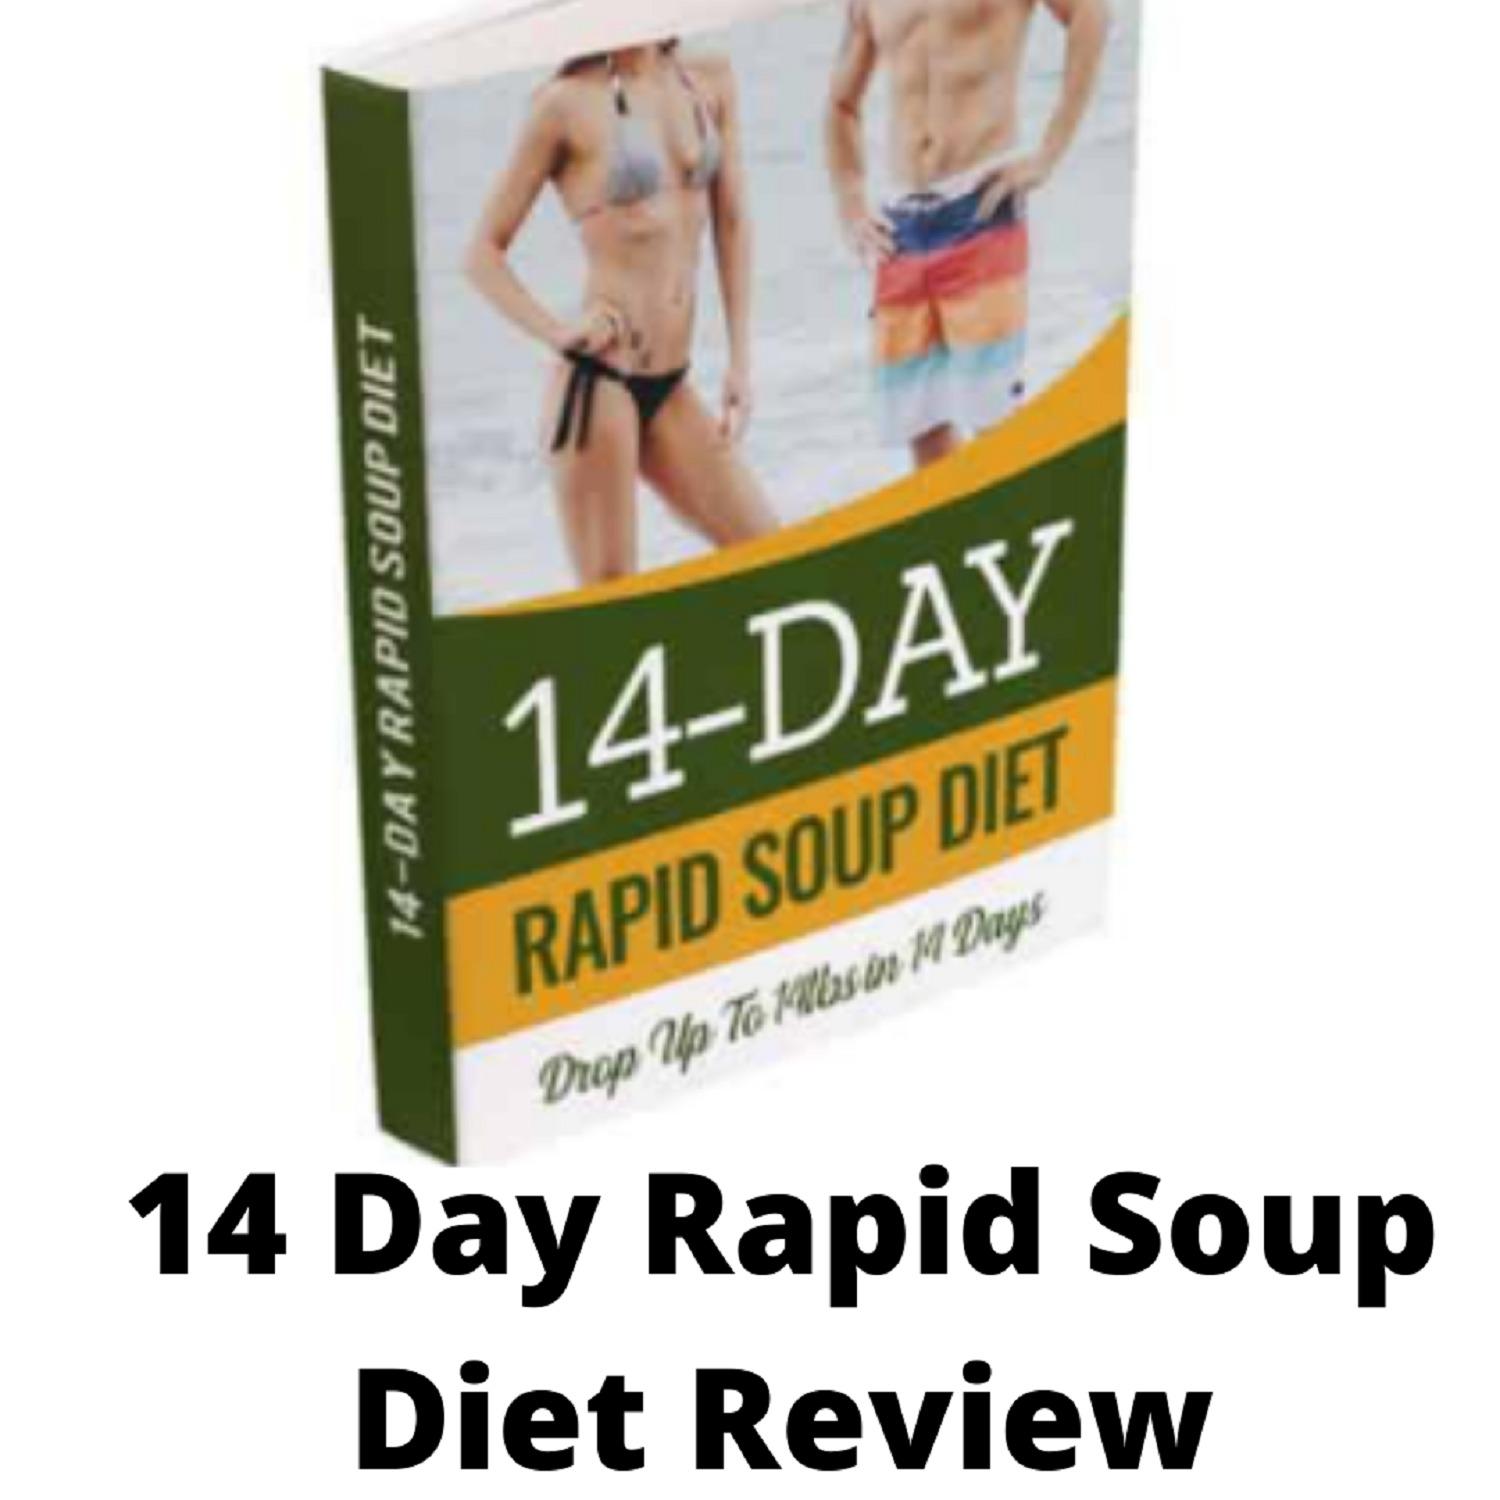 What Is 14-Day Rapid Soup Diet?